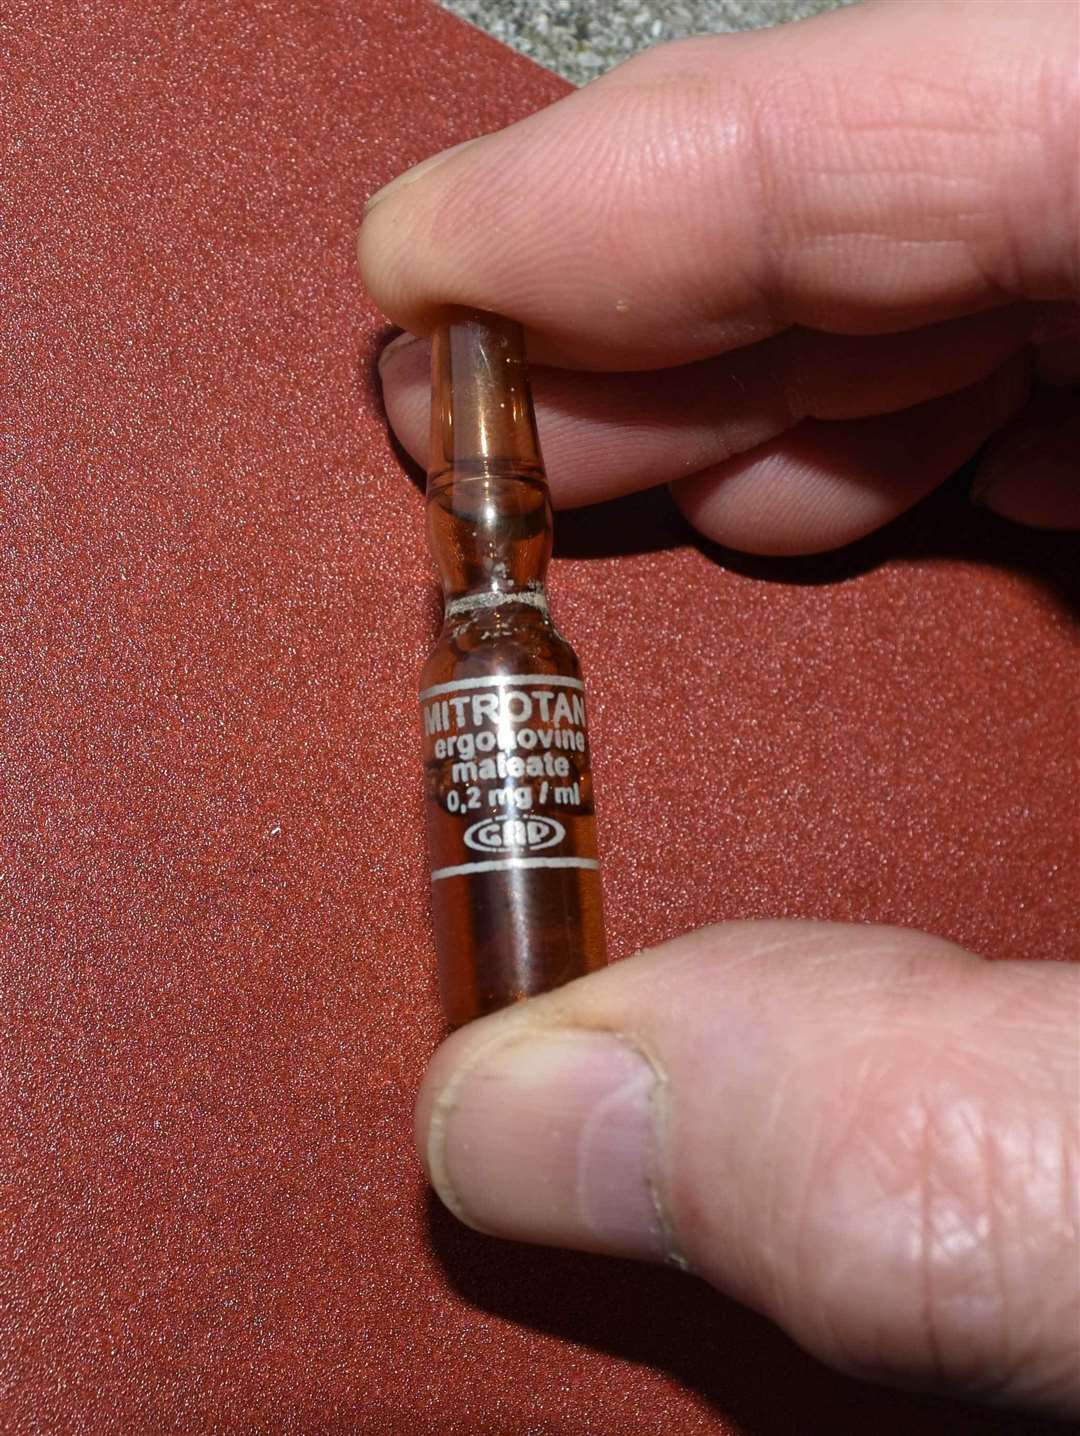 This ampoule was found on Dunnet beach